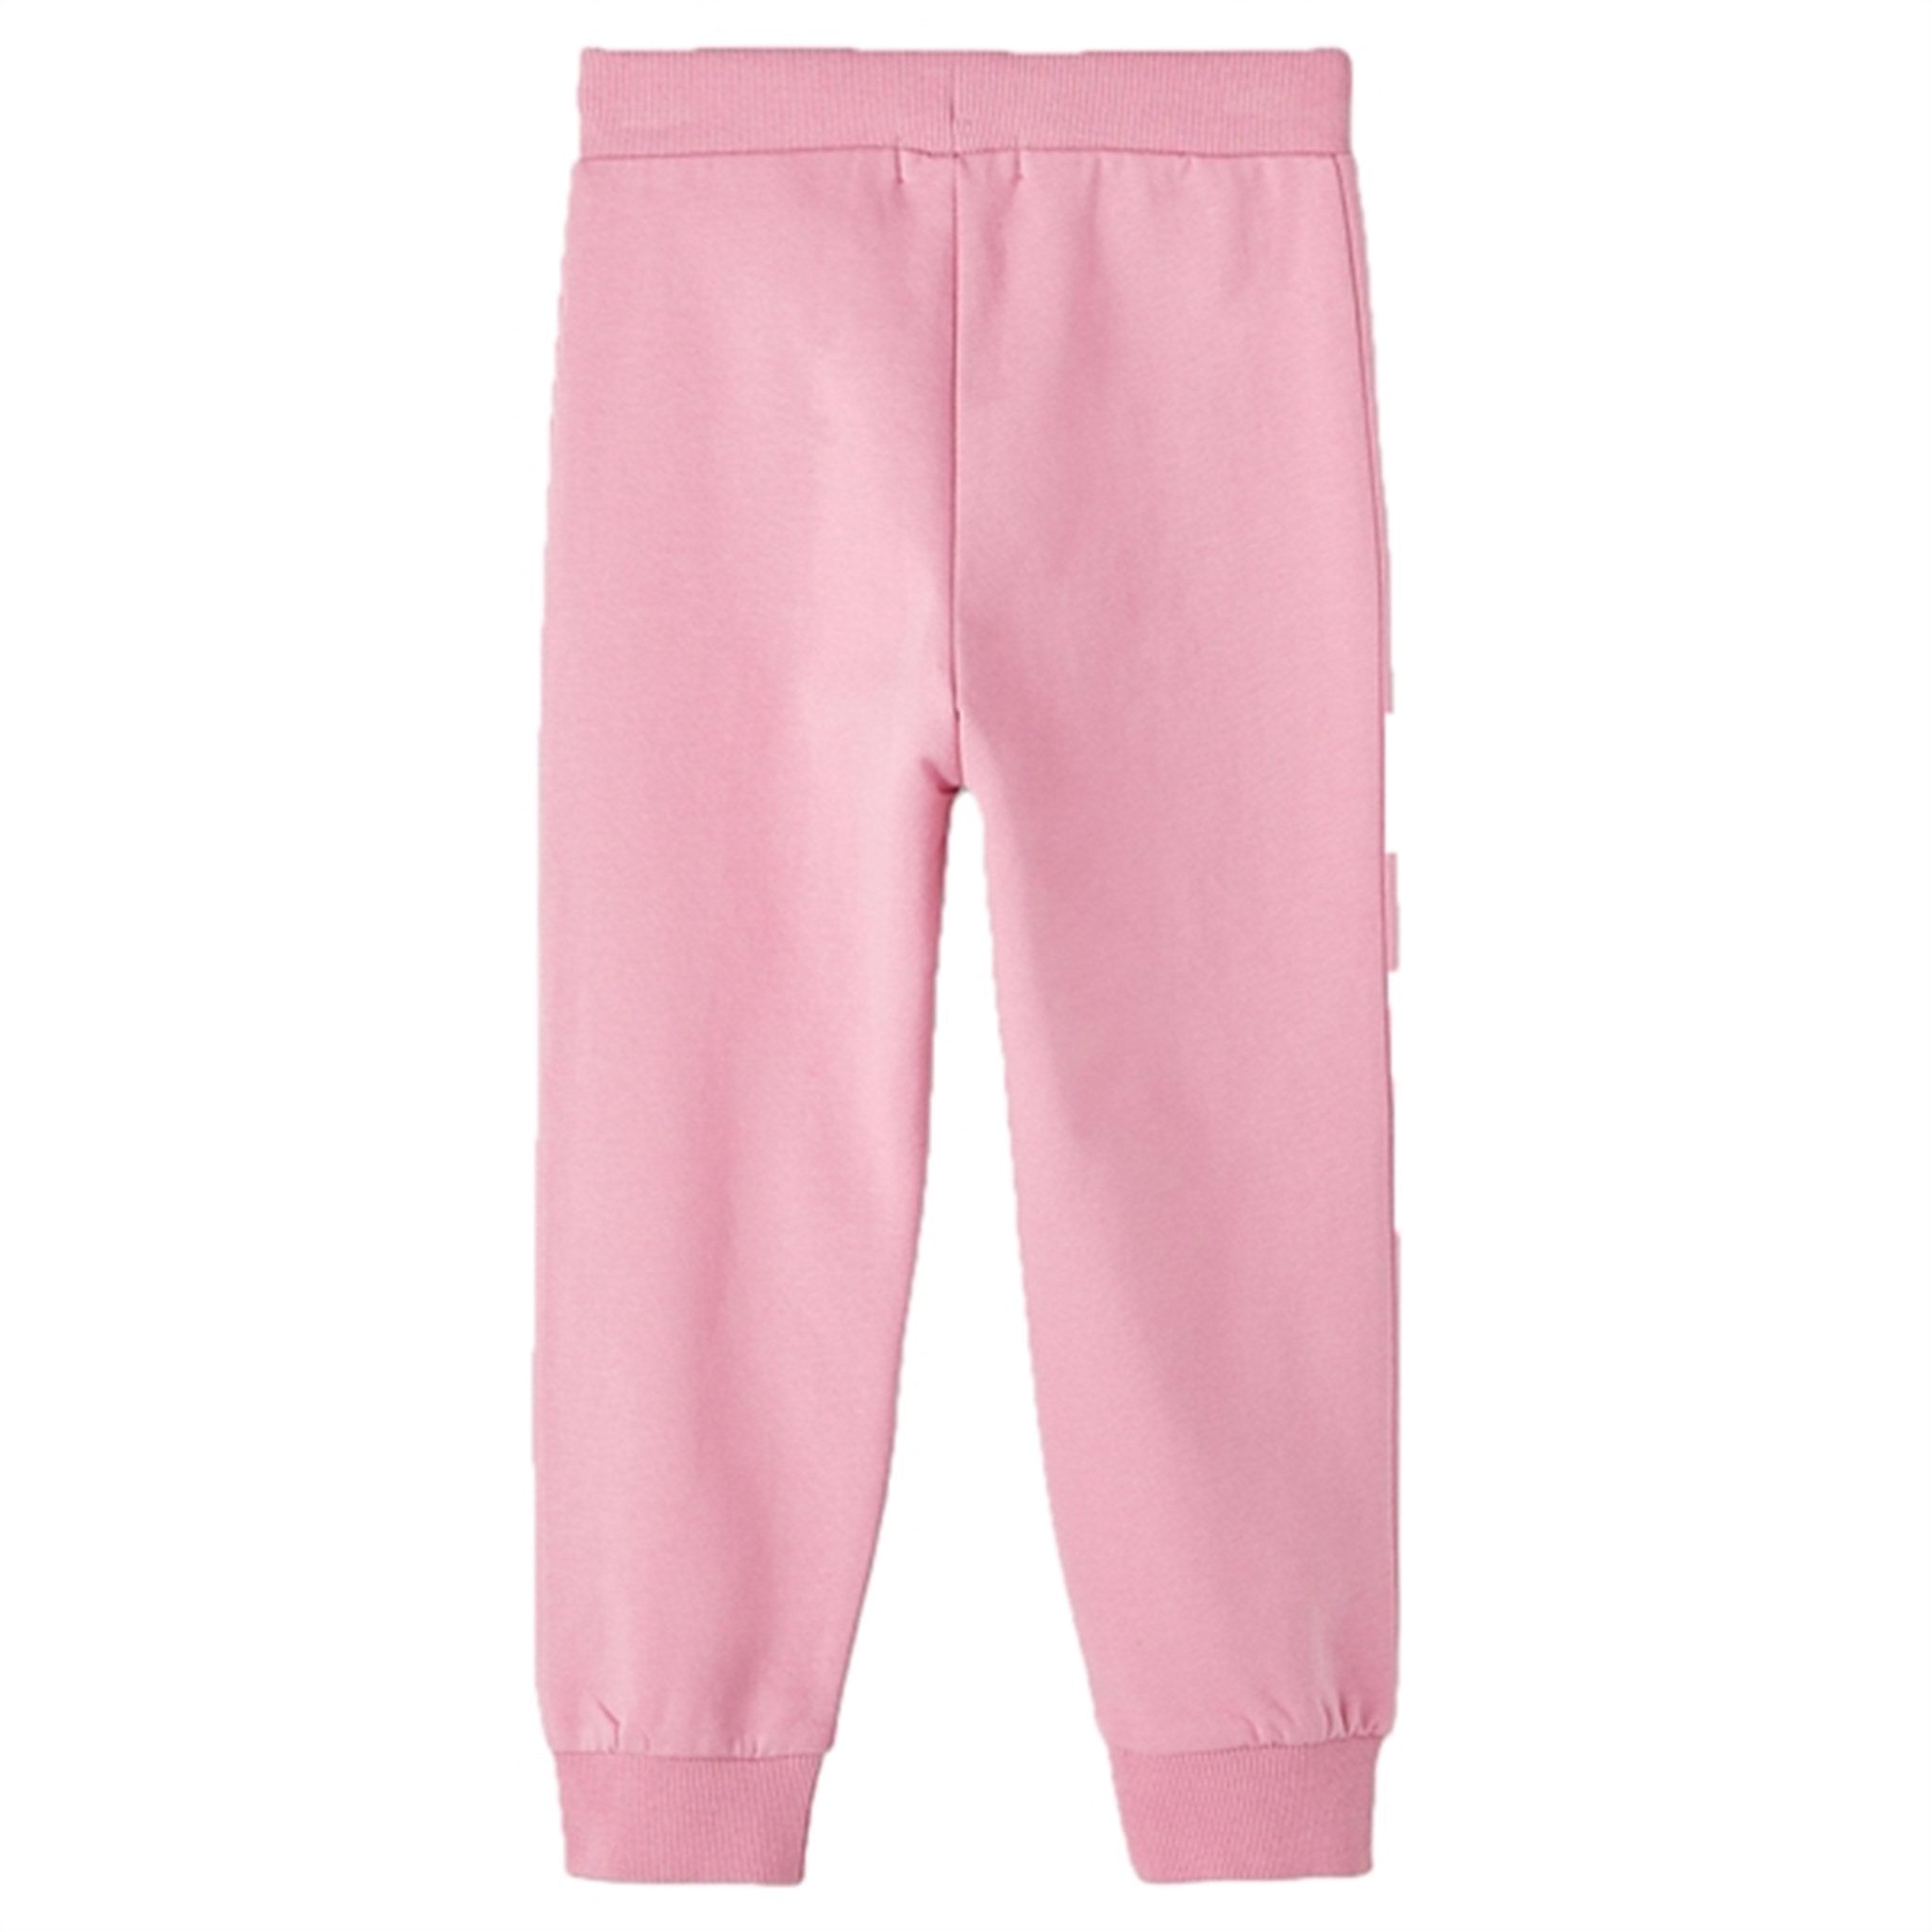 Name it Orchid Smoke Blakely Sweatpants 3